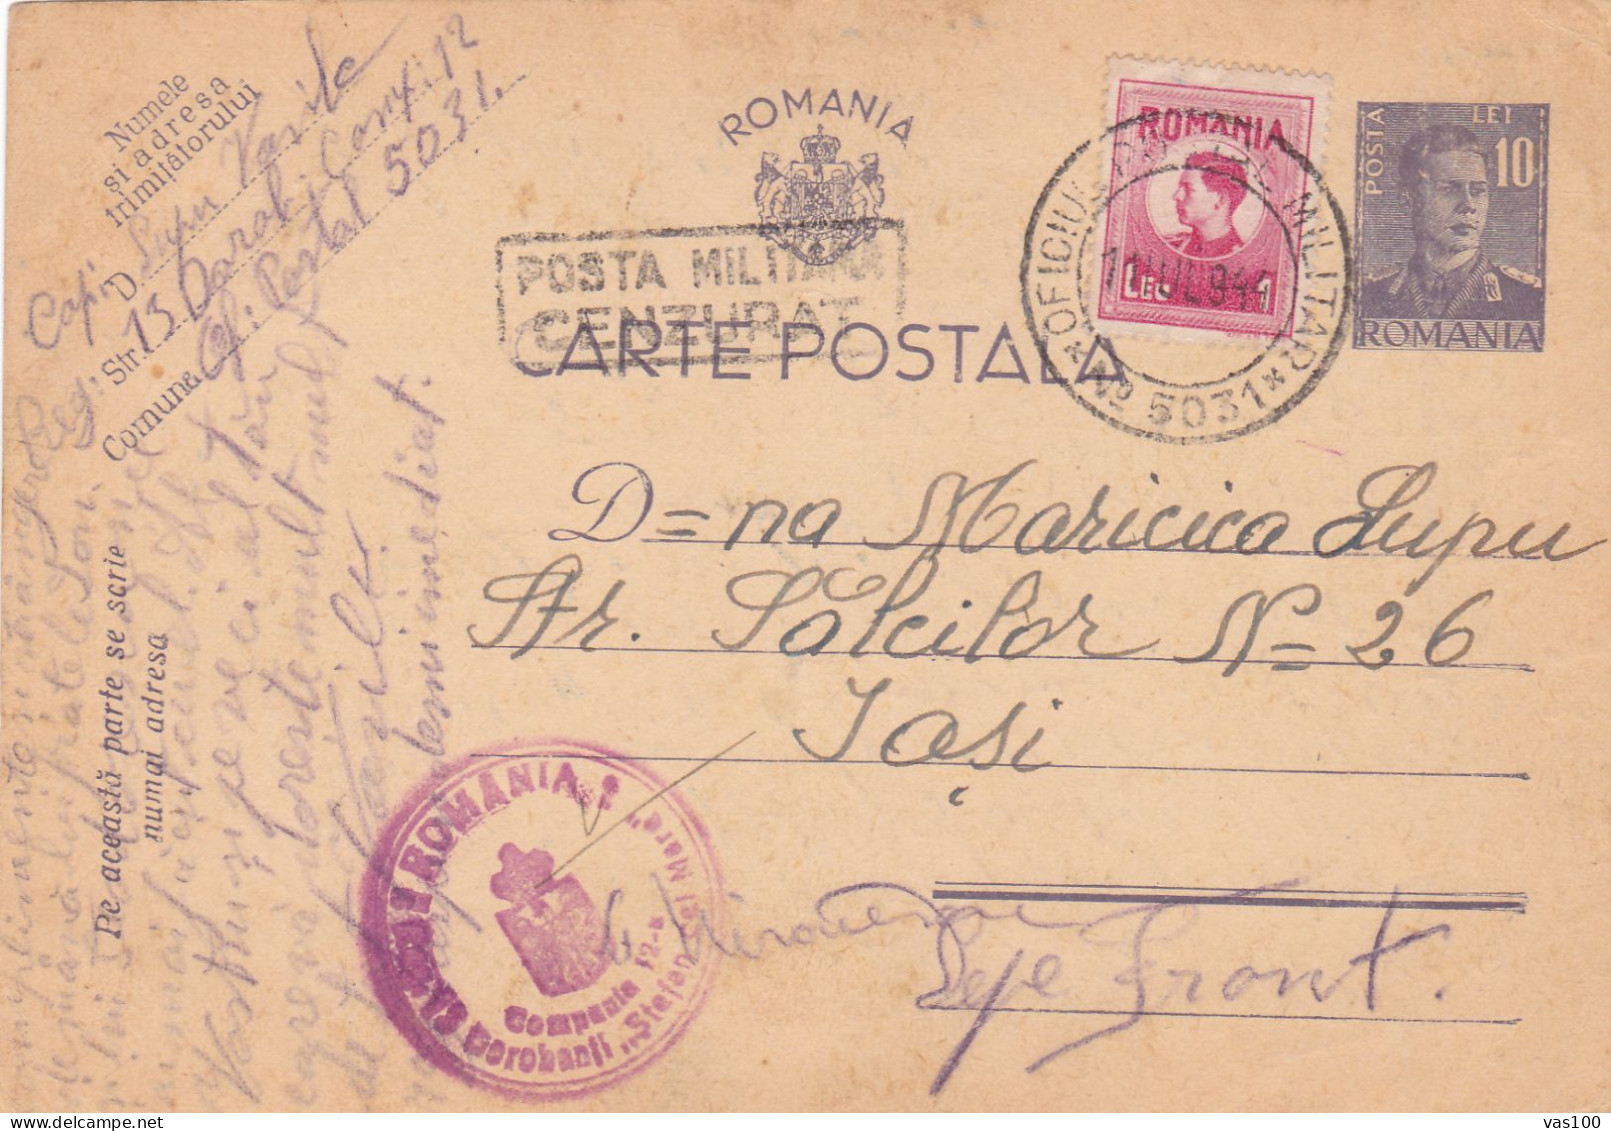 Romania, 1944, WWII Military Censored CENSOR ,POSTCARD STATIONERY, OPM #5031.. - World War 2 Letters